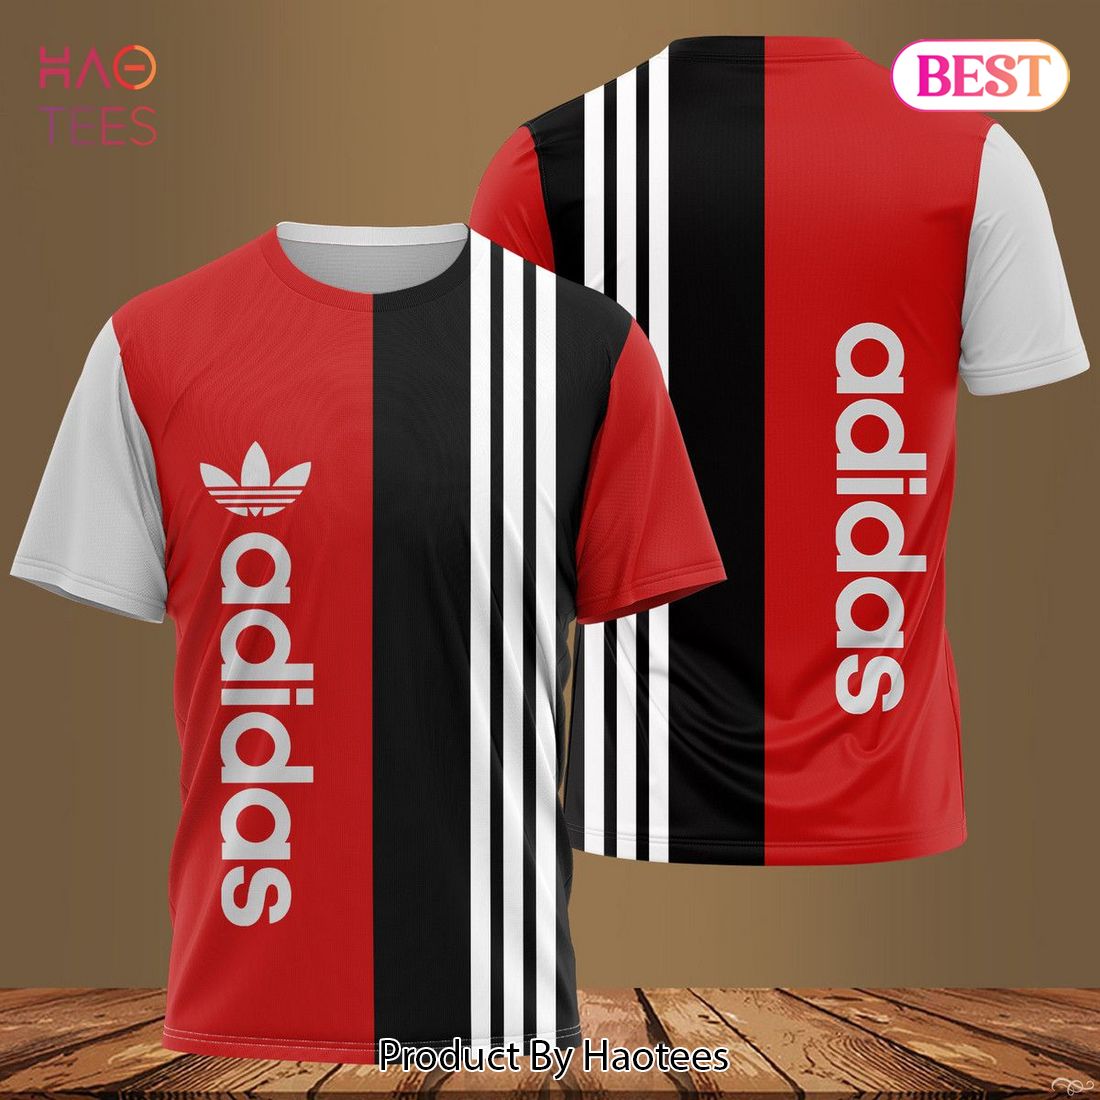 HOT Adidas 3D T-Shirt Red Color Stripe Pattern